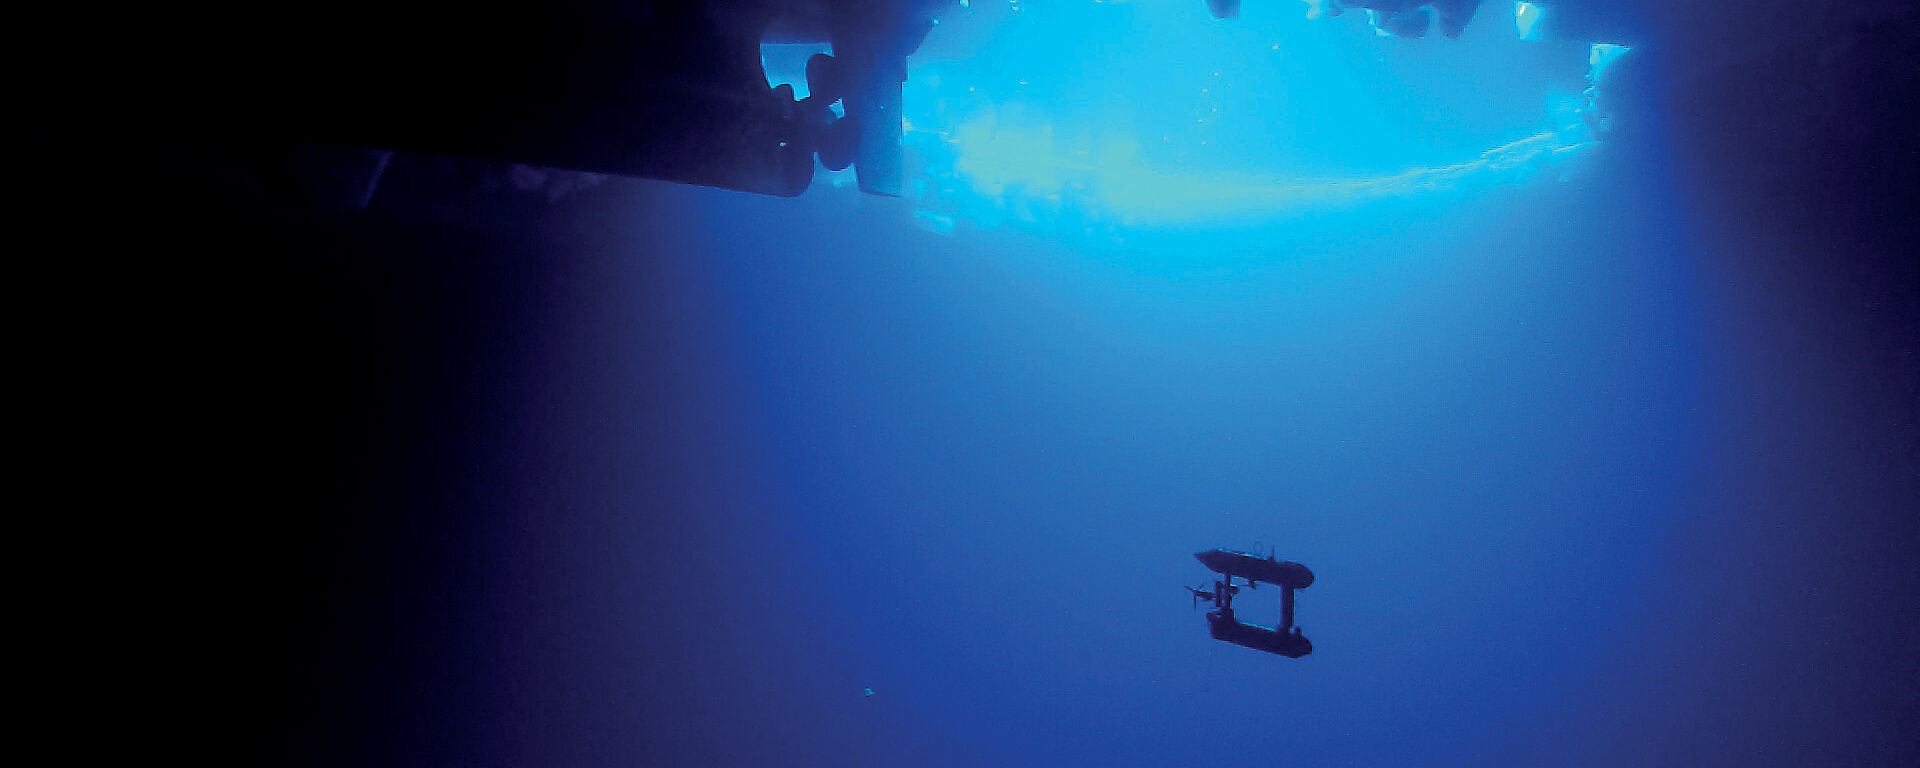 A view of the Autonomous Underwater Vehicle taken by the ROV.